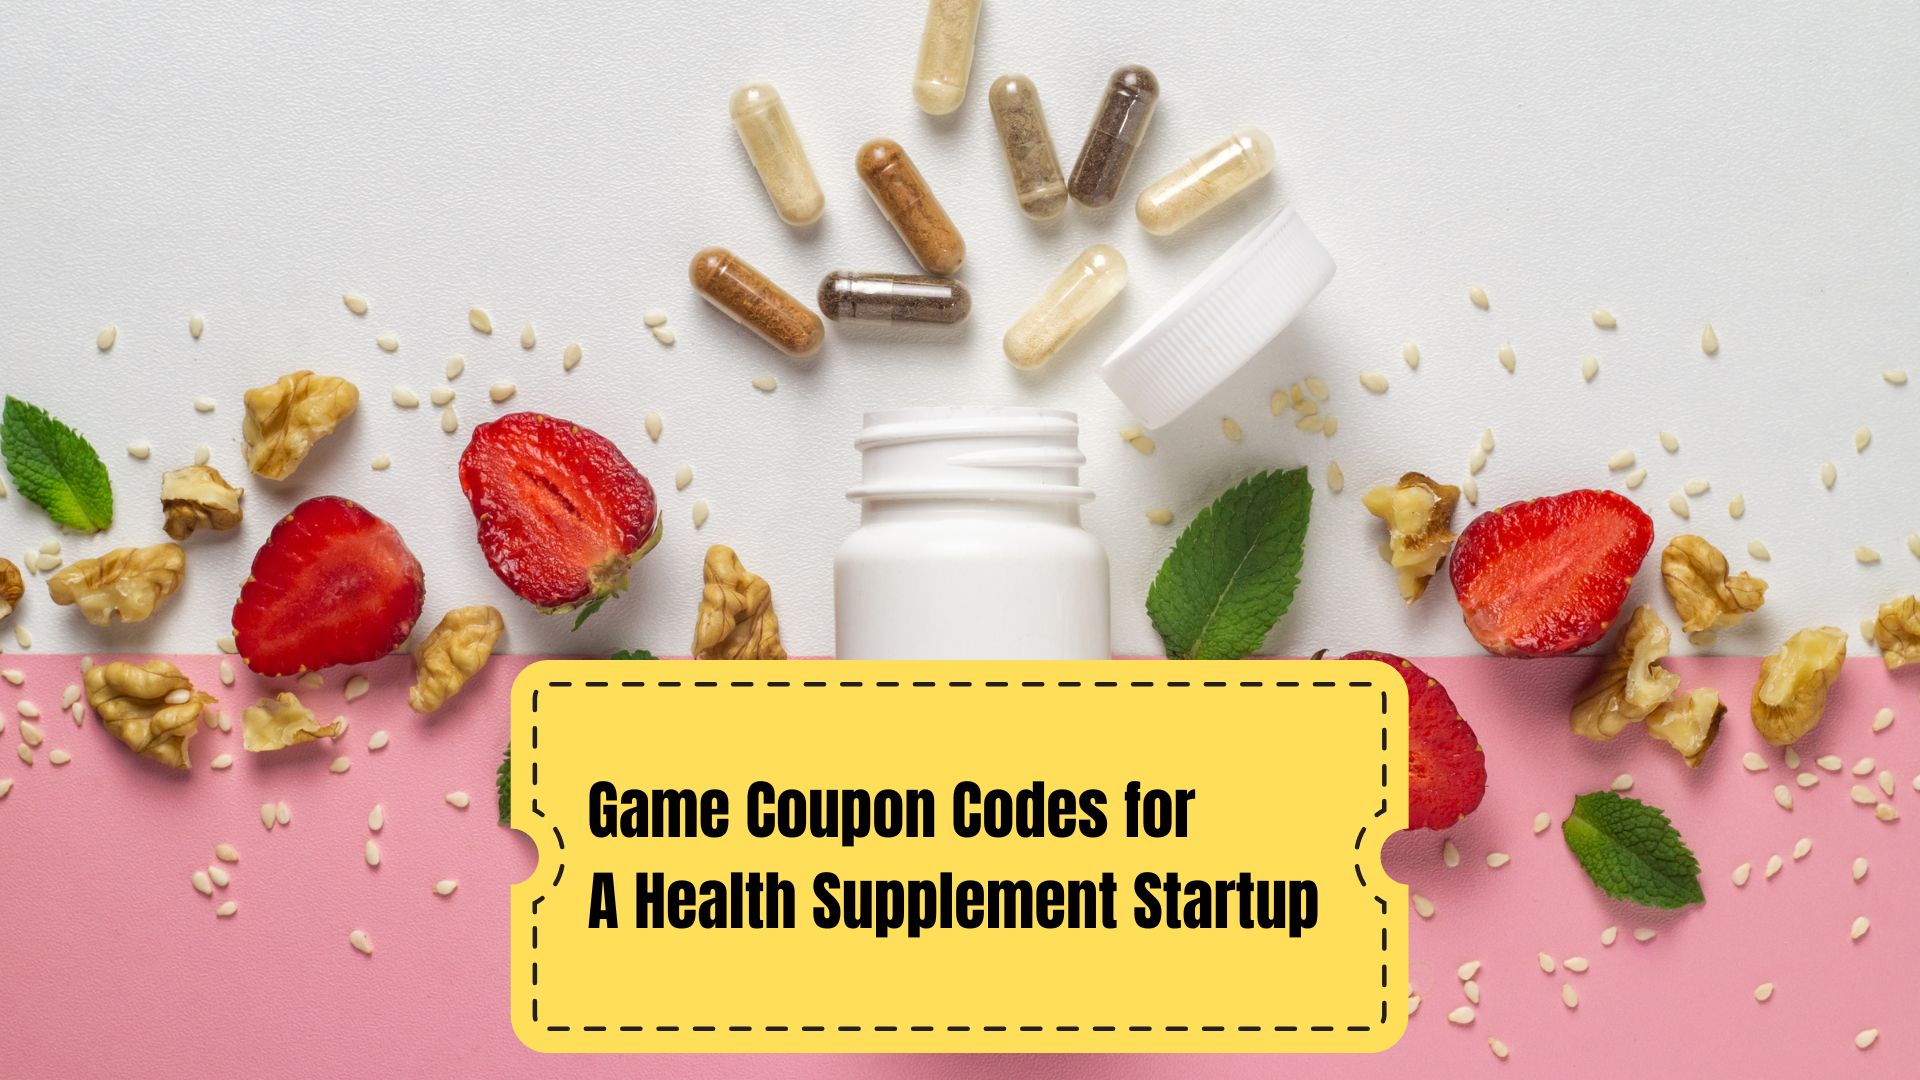 Game Coupon Codes For A Health Supplement Startup